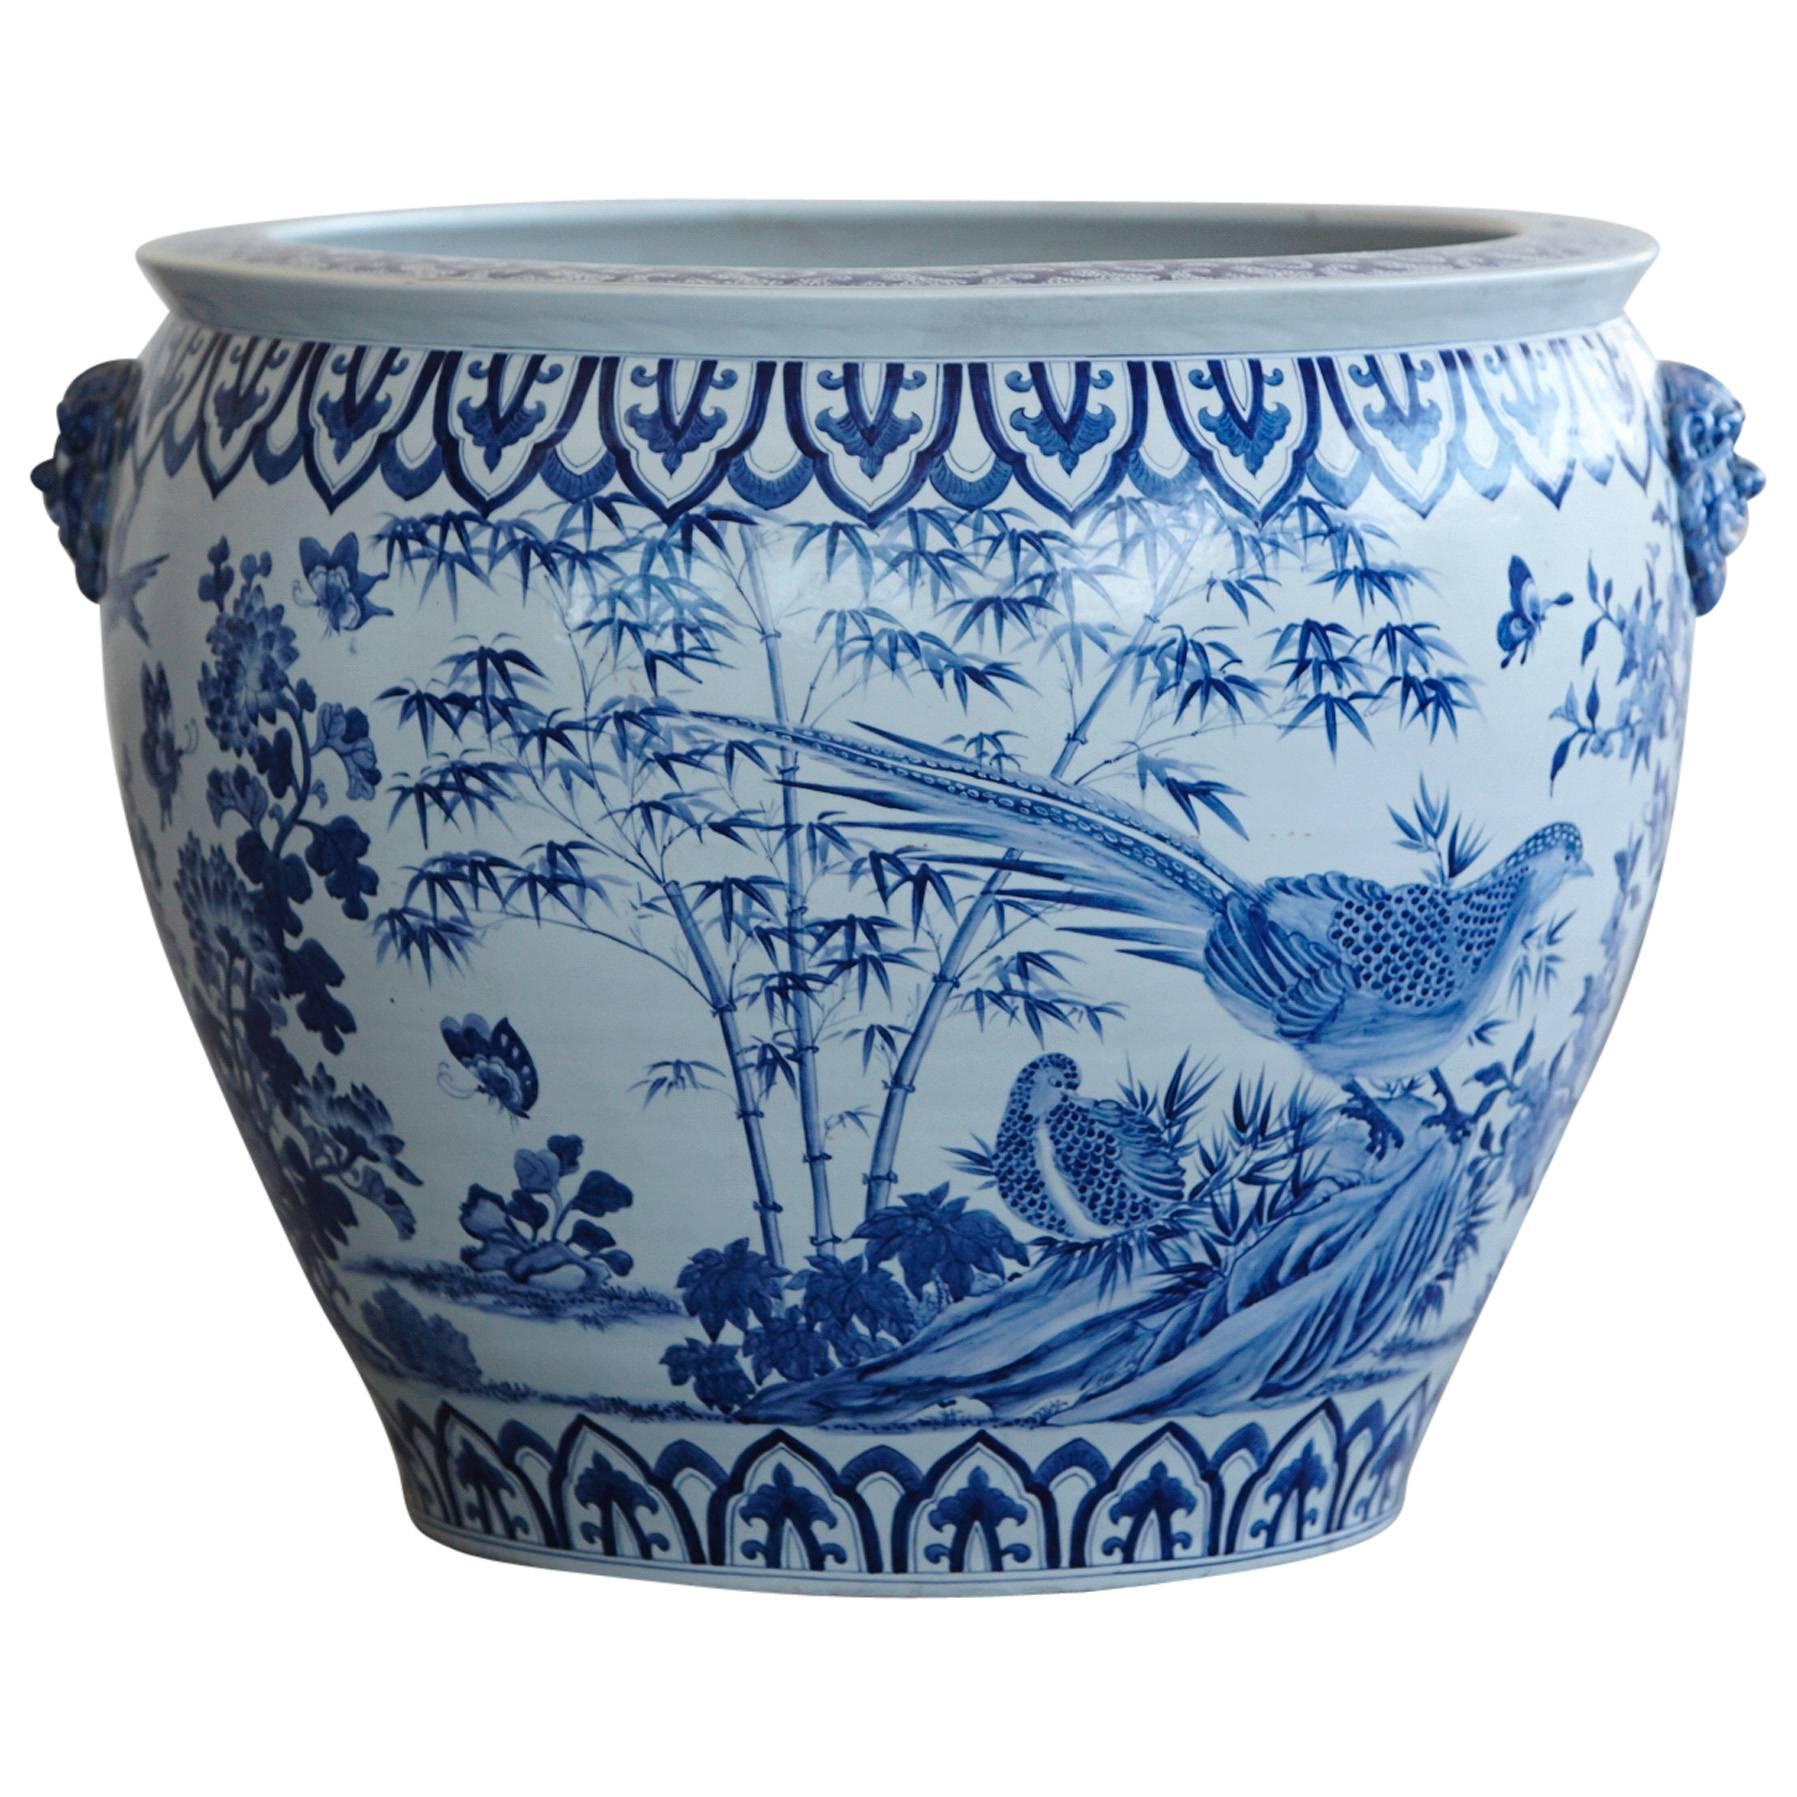 Large Chinese Blue and White Porcelain Jardinière or Planter